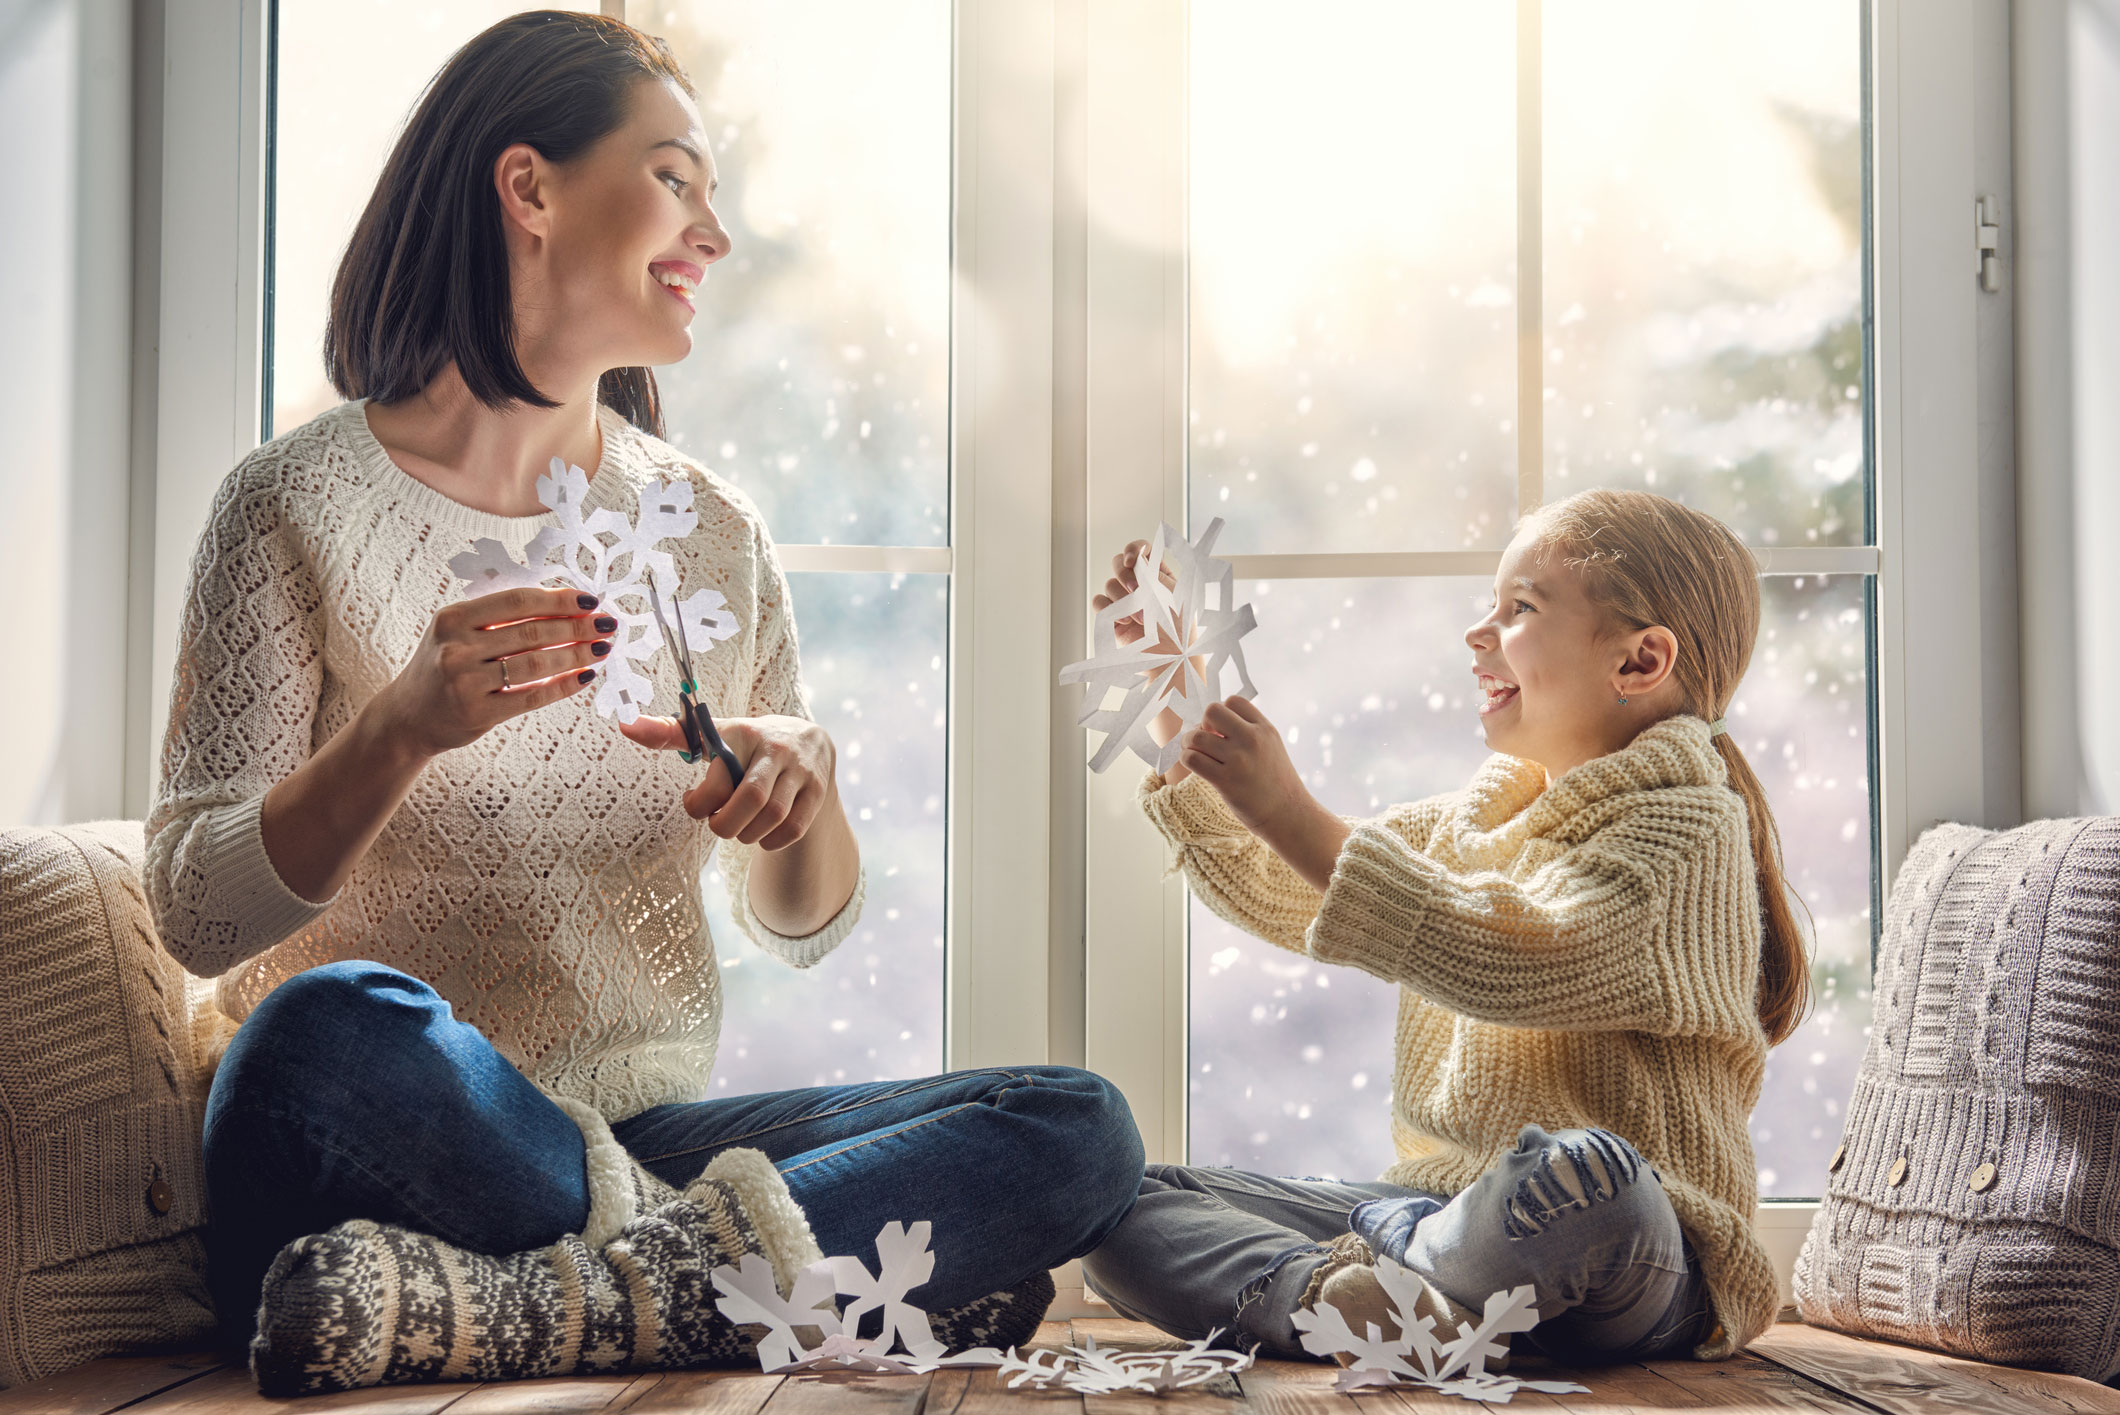 A mom and daughter sitting on a widnow seat making paper snowflakes with a snowy landscape in the background